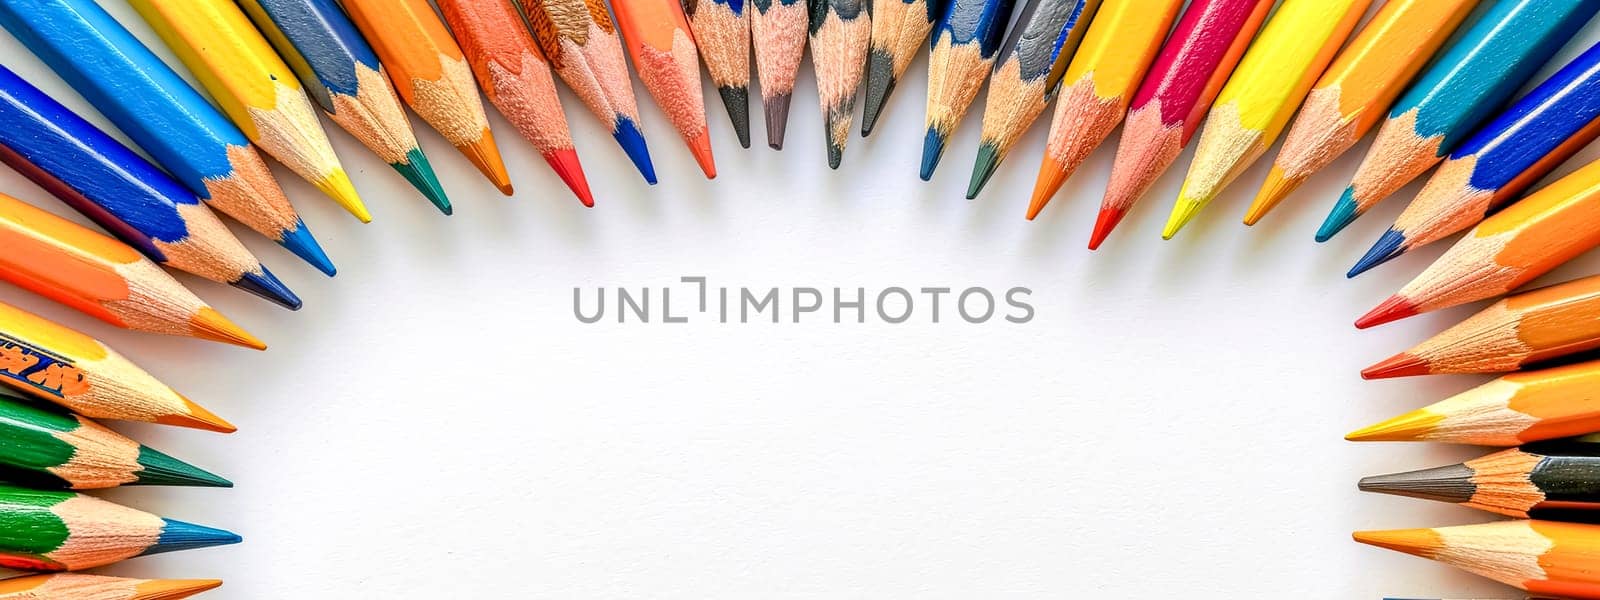 colored pencils neatly arranged in two converging lines against a white background, showcasing a spectrum of colors from blues and greens to yellows, oranges, and reds by Edophoto